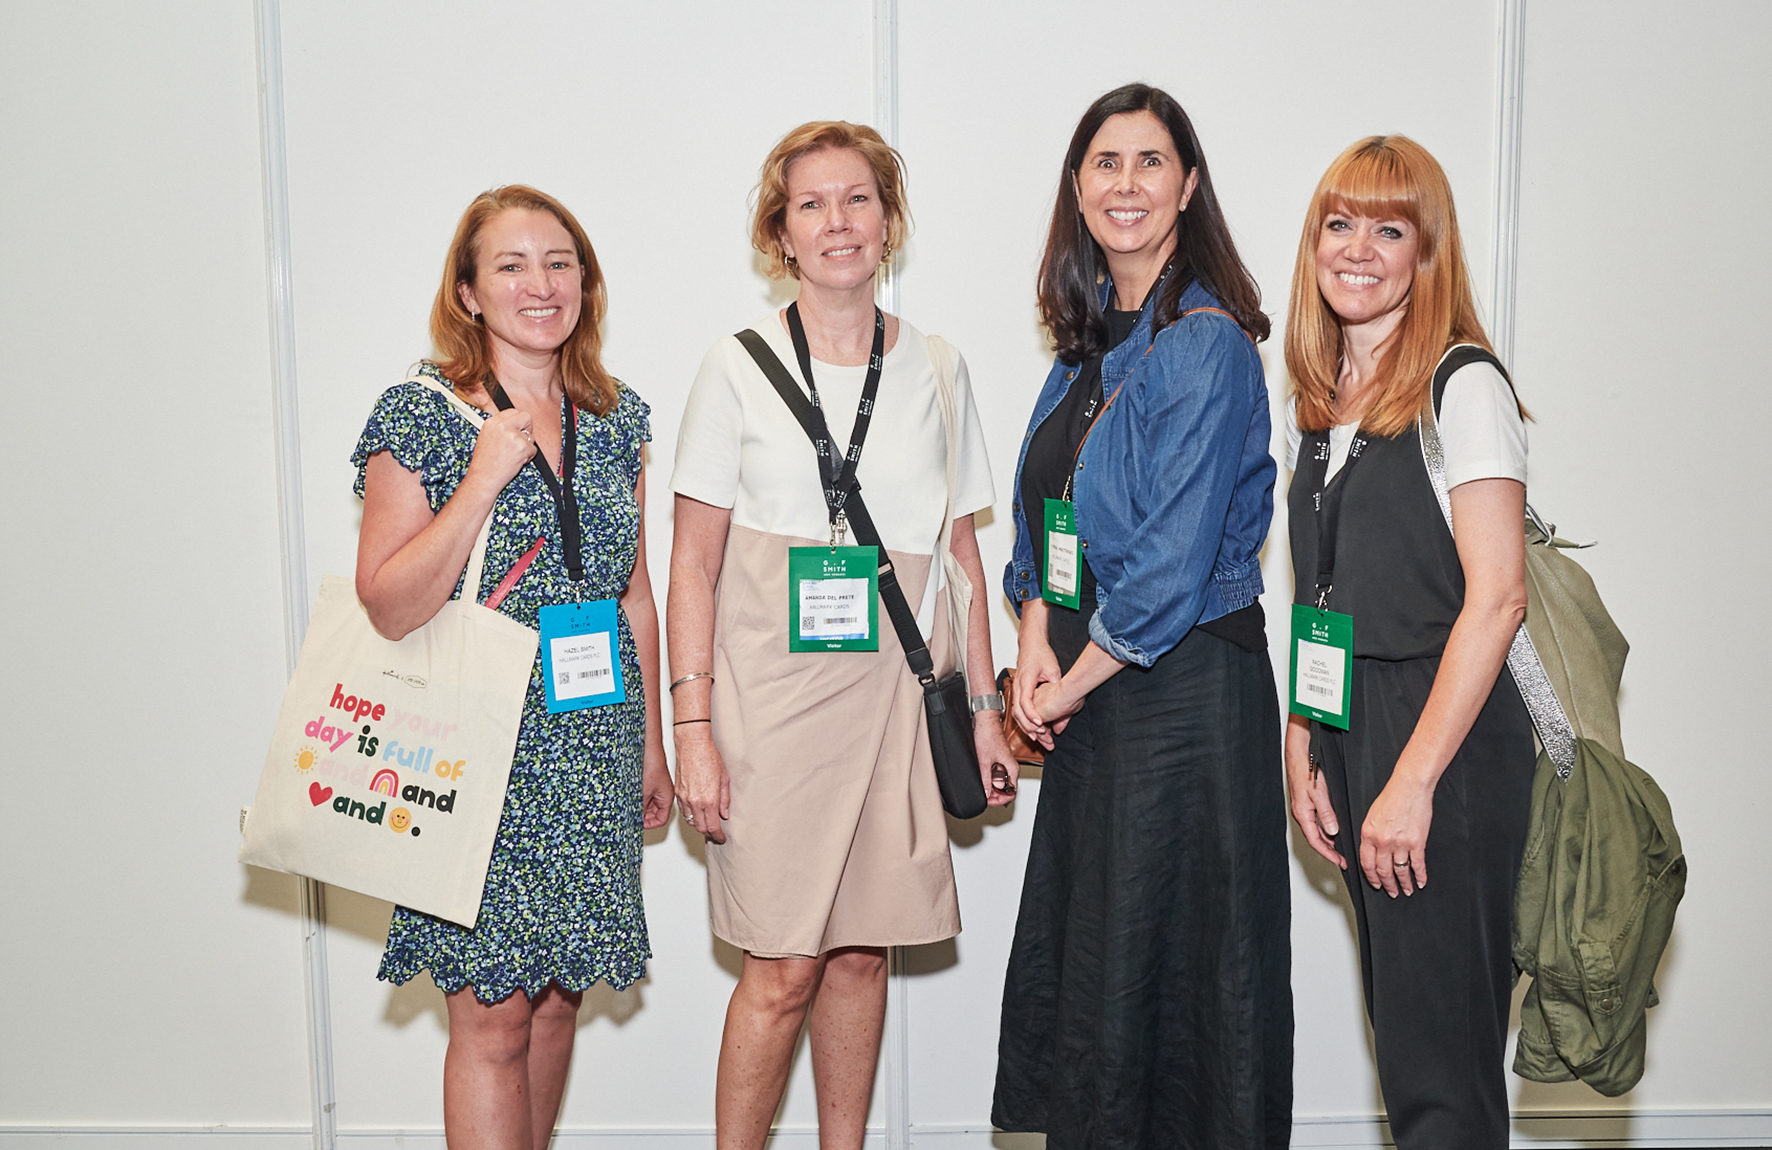 Above: Amanda Del Prete (second left) with Hallmark colleagues at PG Live in July.